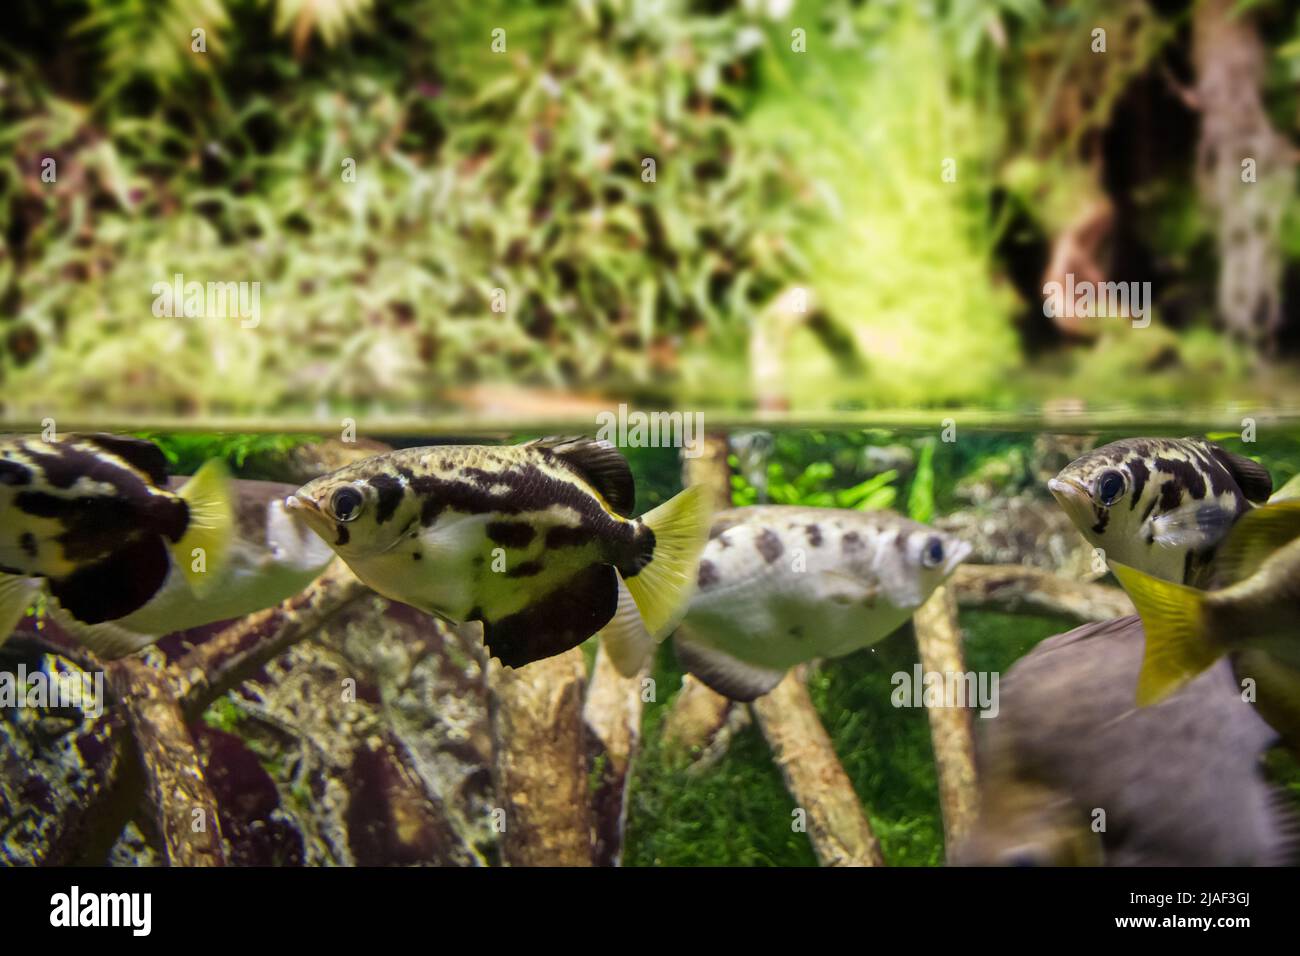 Banded archerfish close-up view in mangrove water Stock Photo